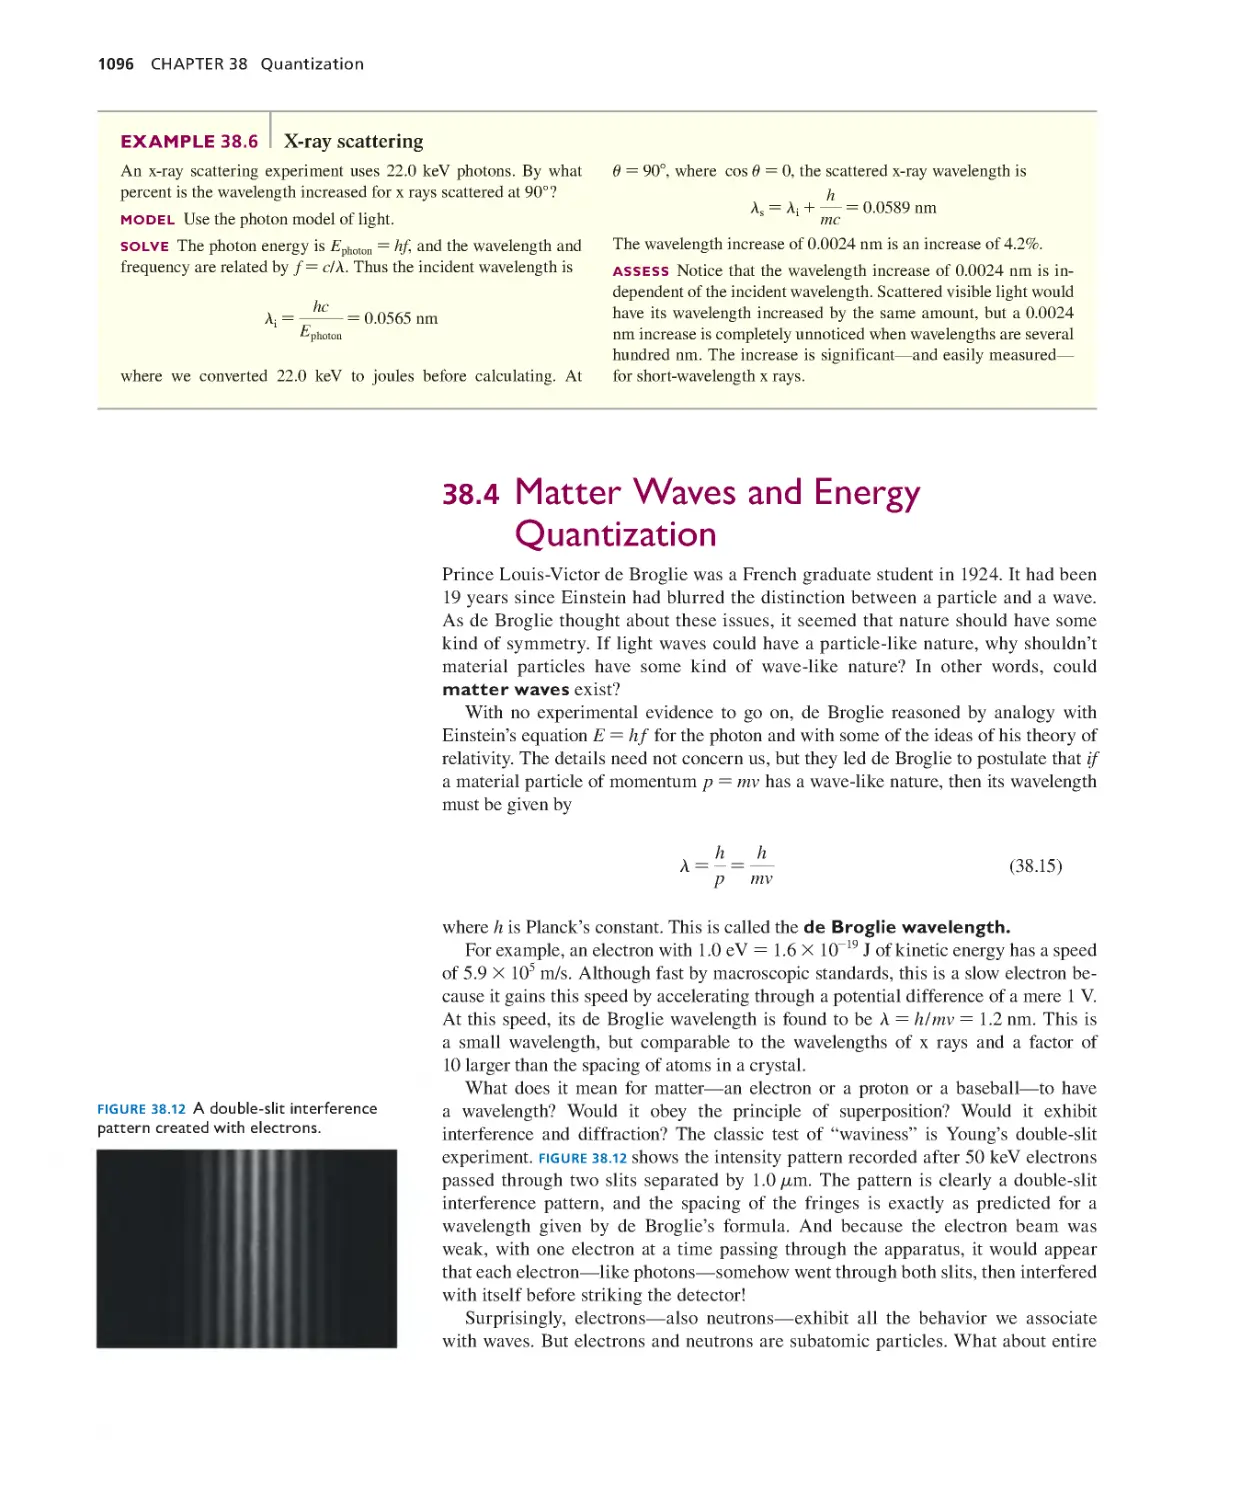 38.4. Matter Waves and Energy Quantization